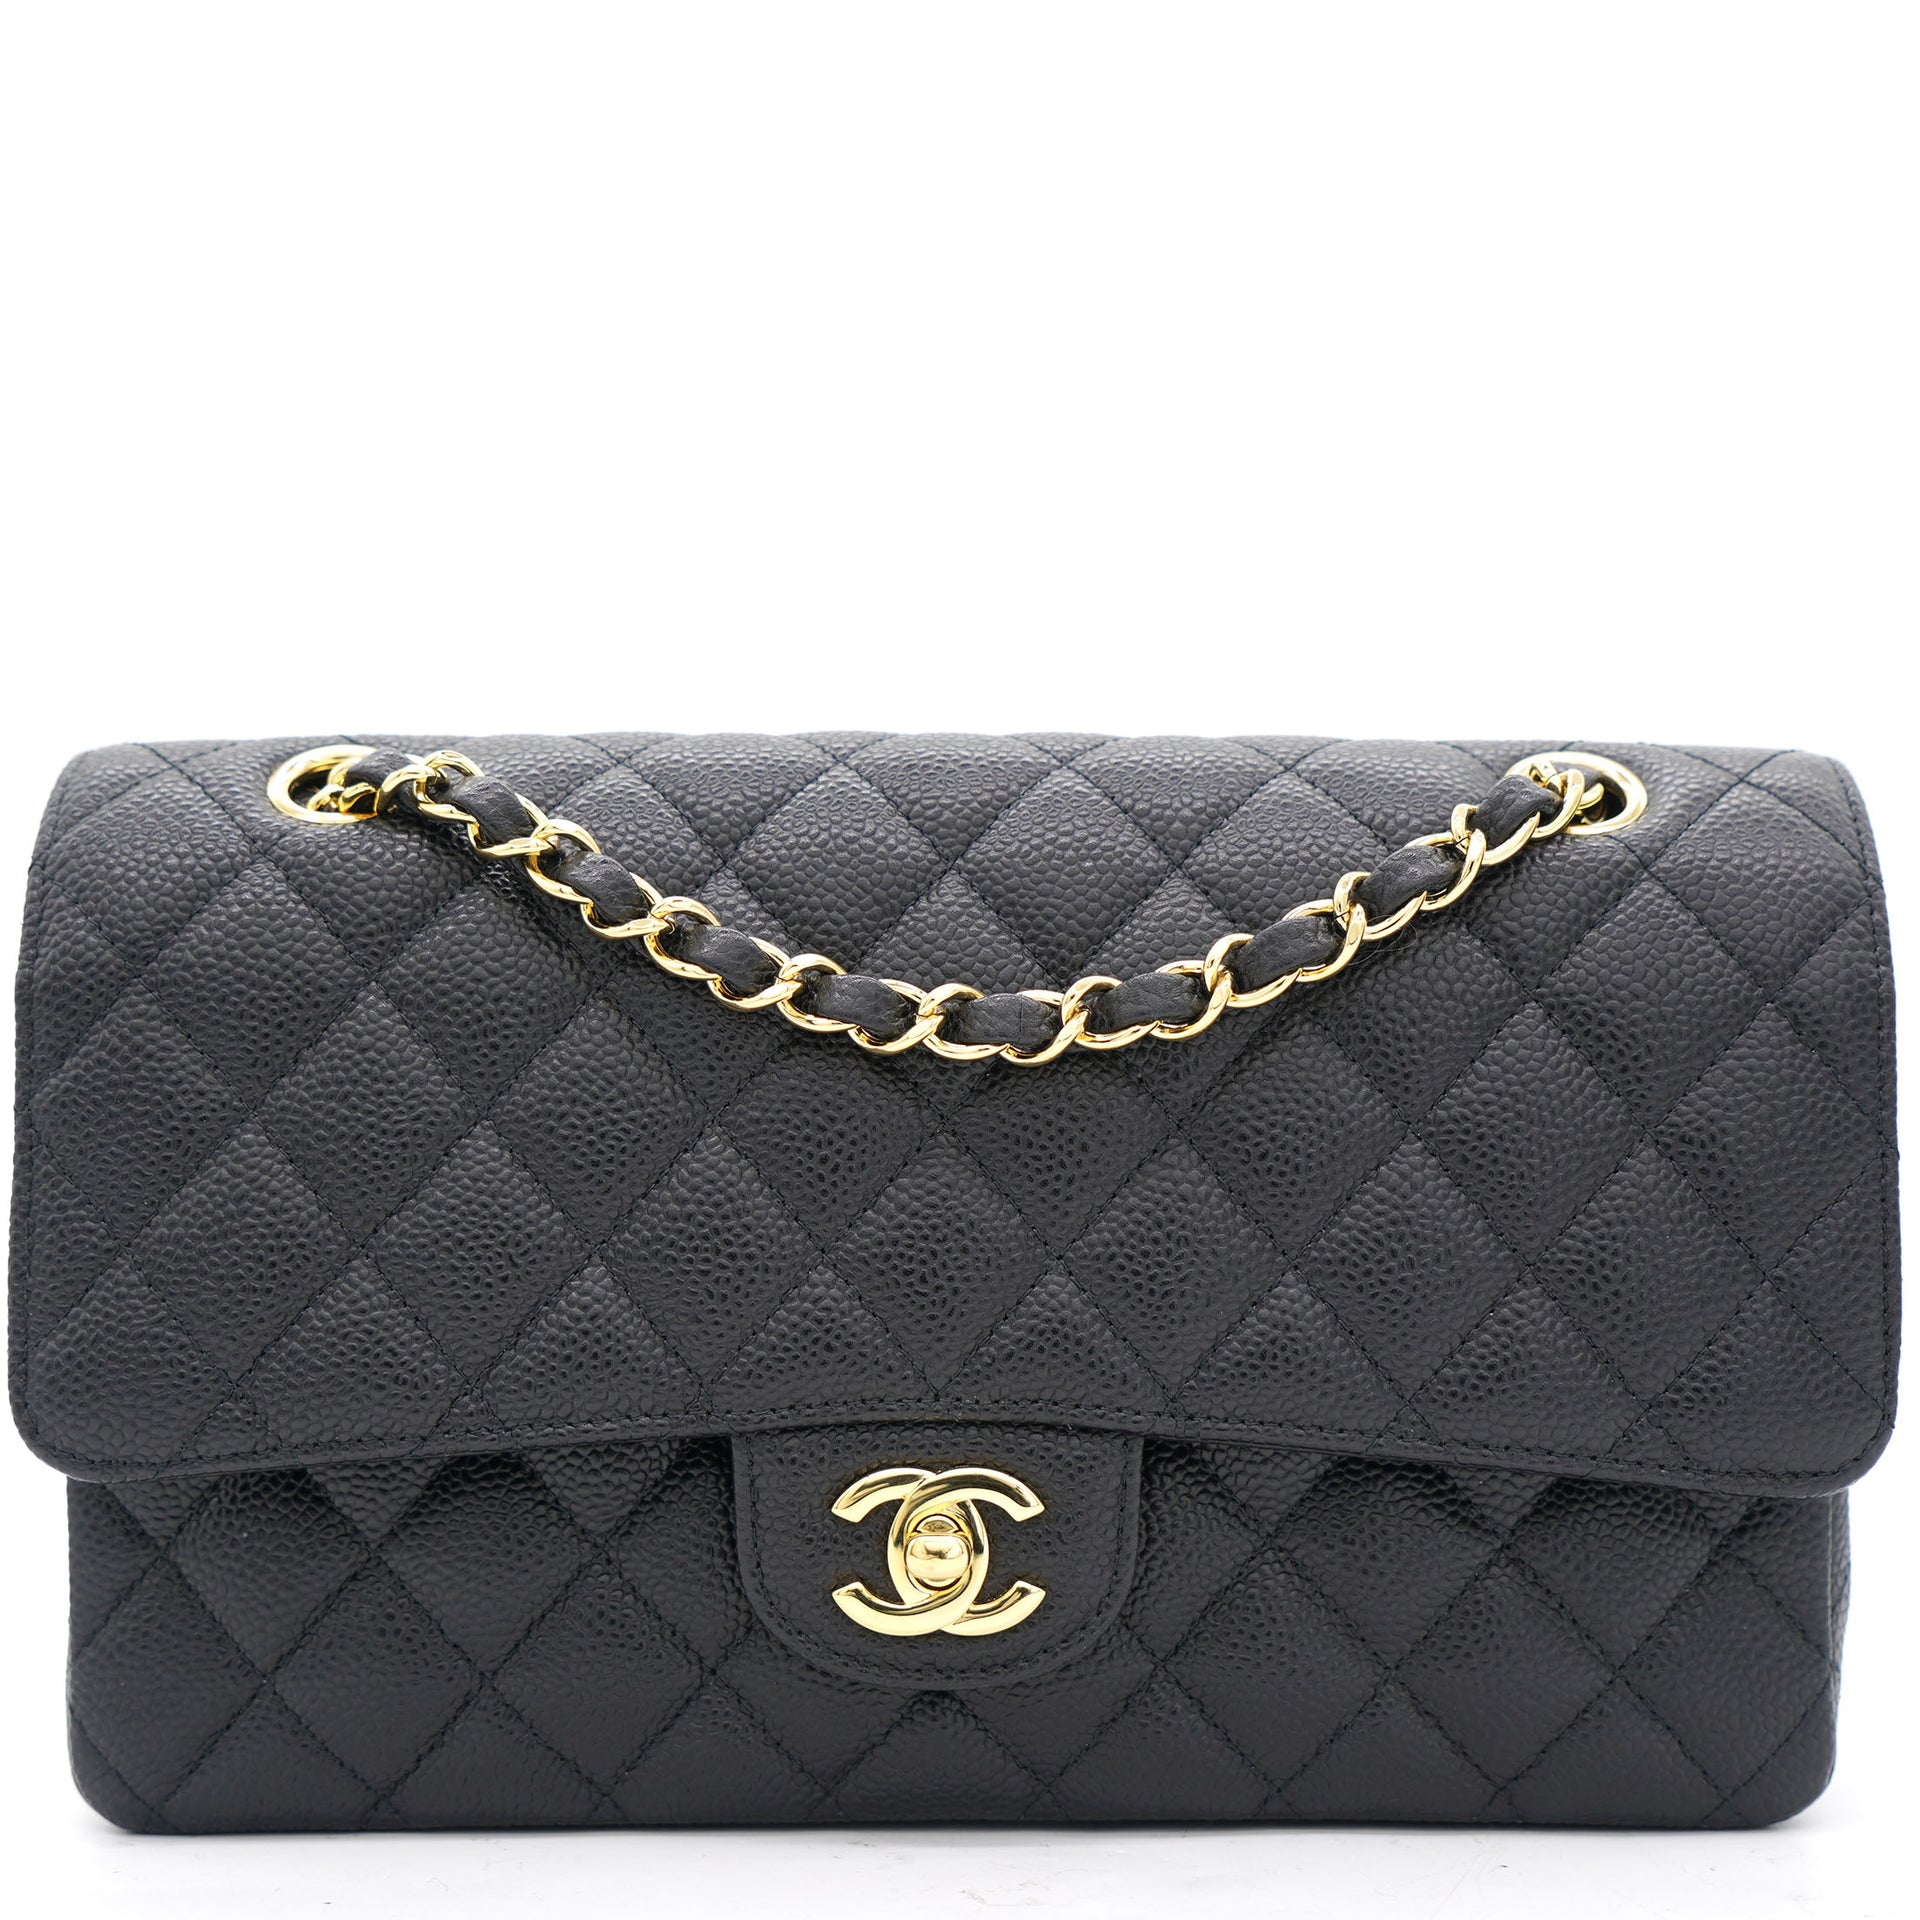 PRE-OWNED CHANEL CLASSIC QUILTED CAVIAR (MEDIUM) DOUBLE FLAP GHW